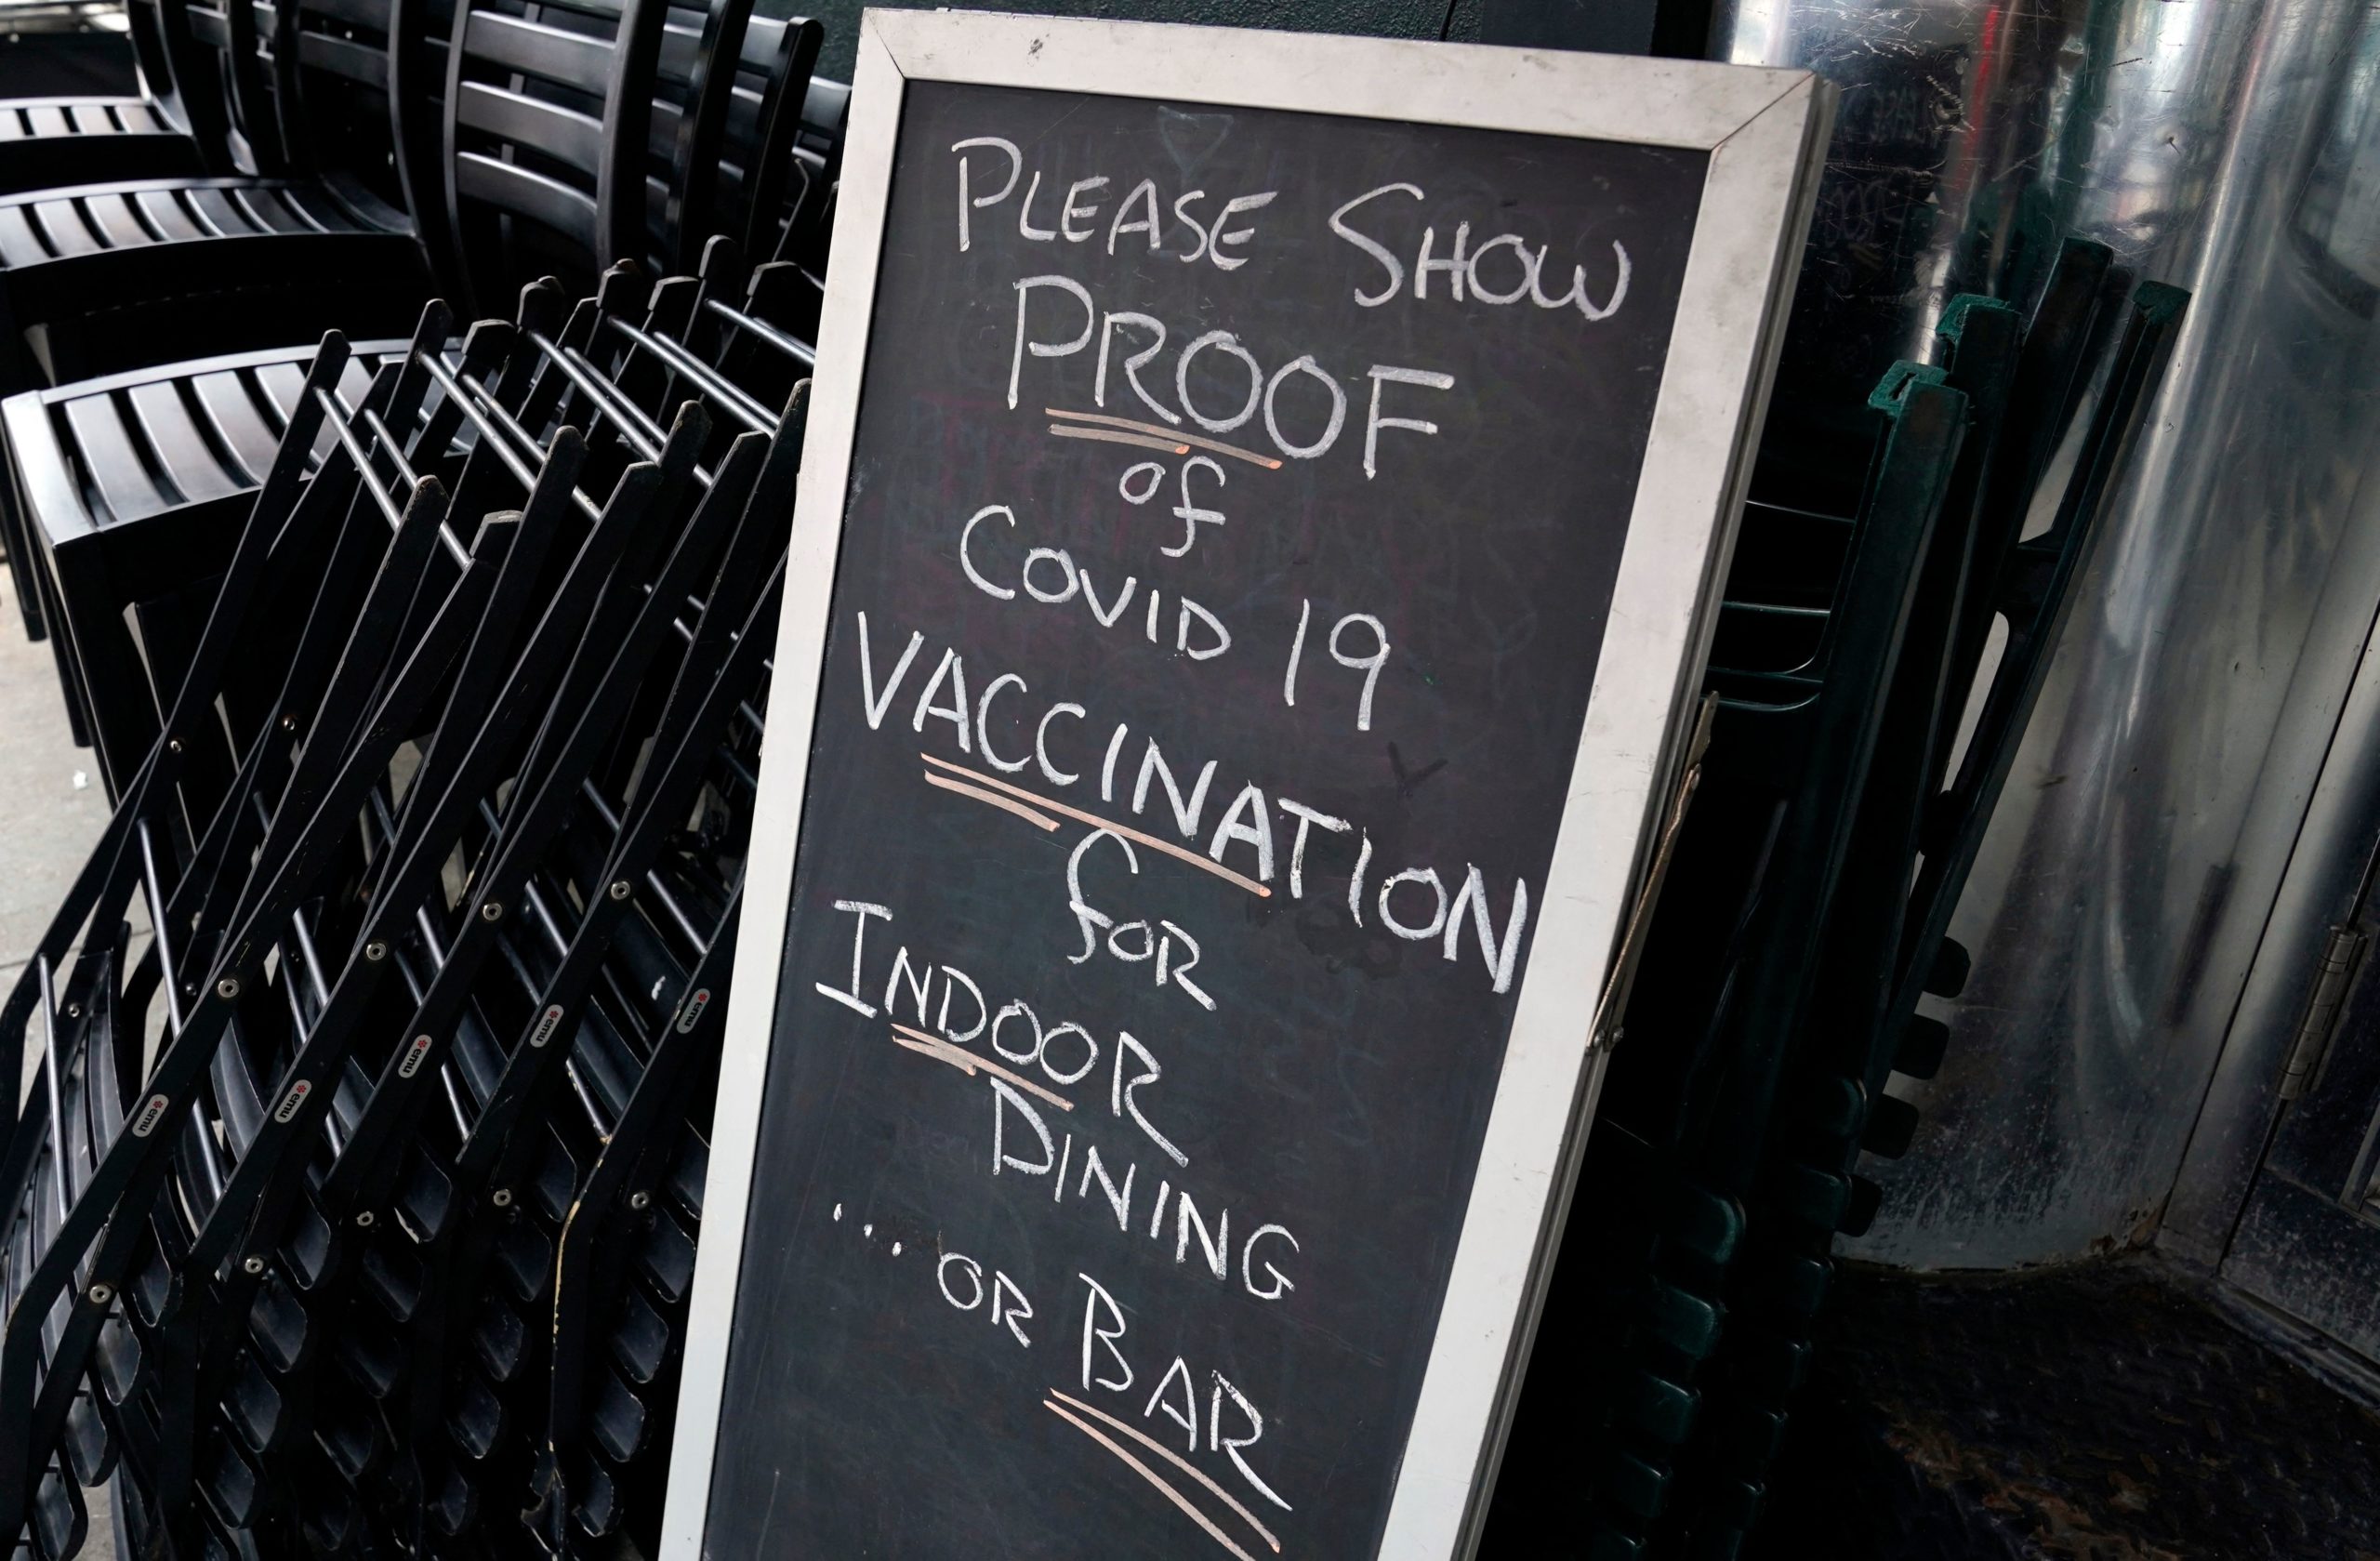 A sign is viewed at a restaurant in New York's Upper West Side on August 17, 2021, the first day where you have to show proof of having a Covid-19 vaccination to participate in indoor dining. - The vaccine mandate also includes indoor gyms, and all indoor entertainment in New York City. (Photo by TIMOTHY A. CLARY / AFP) (Photo by TIMOTHY A. CLARY/AFP via Getty Images)